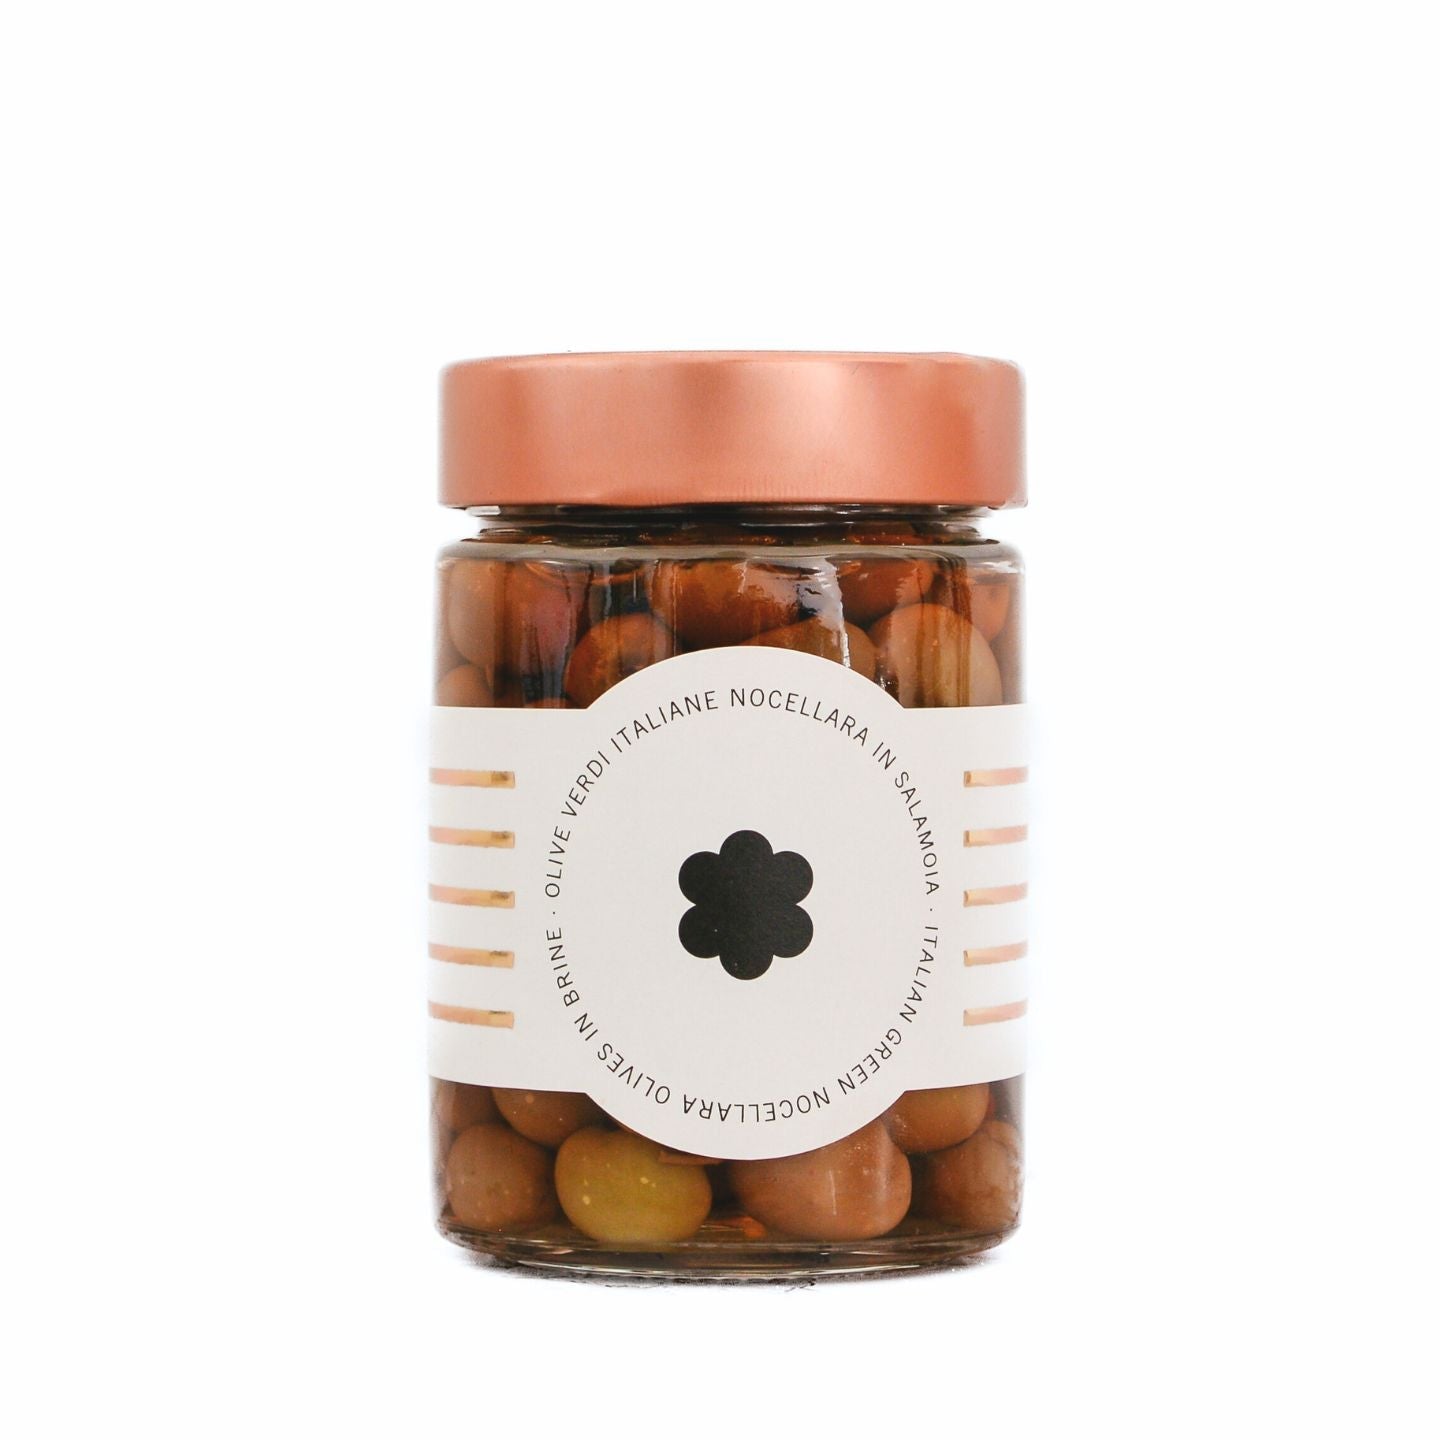 Tenute Cristiano Tenute Cristiano Nocellara Olives 185g  | Imported and distributed in the UK by Just Gourmet Foods